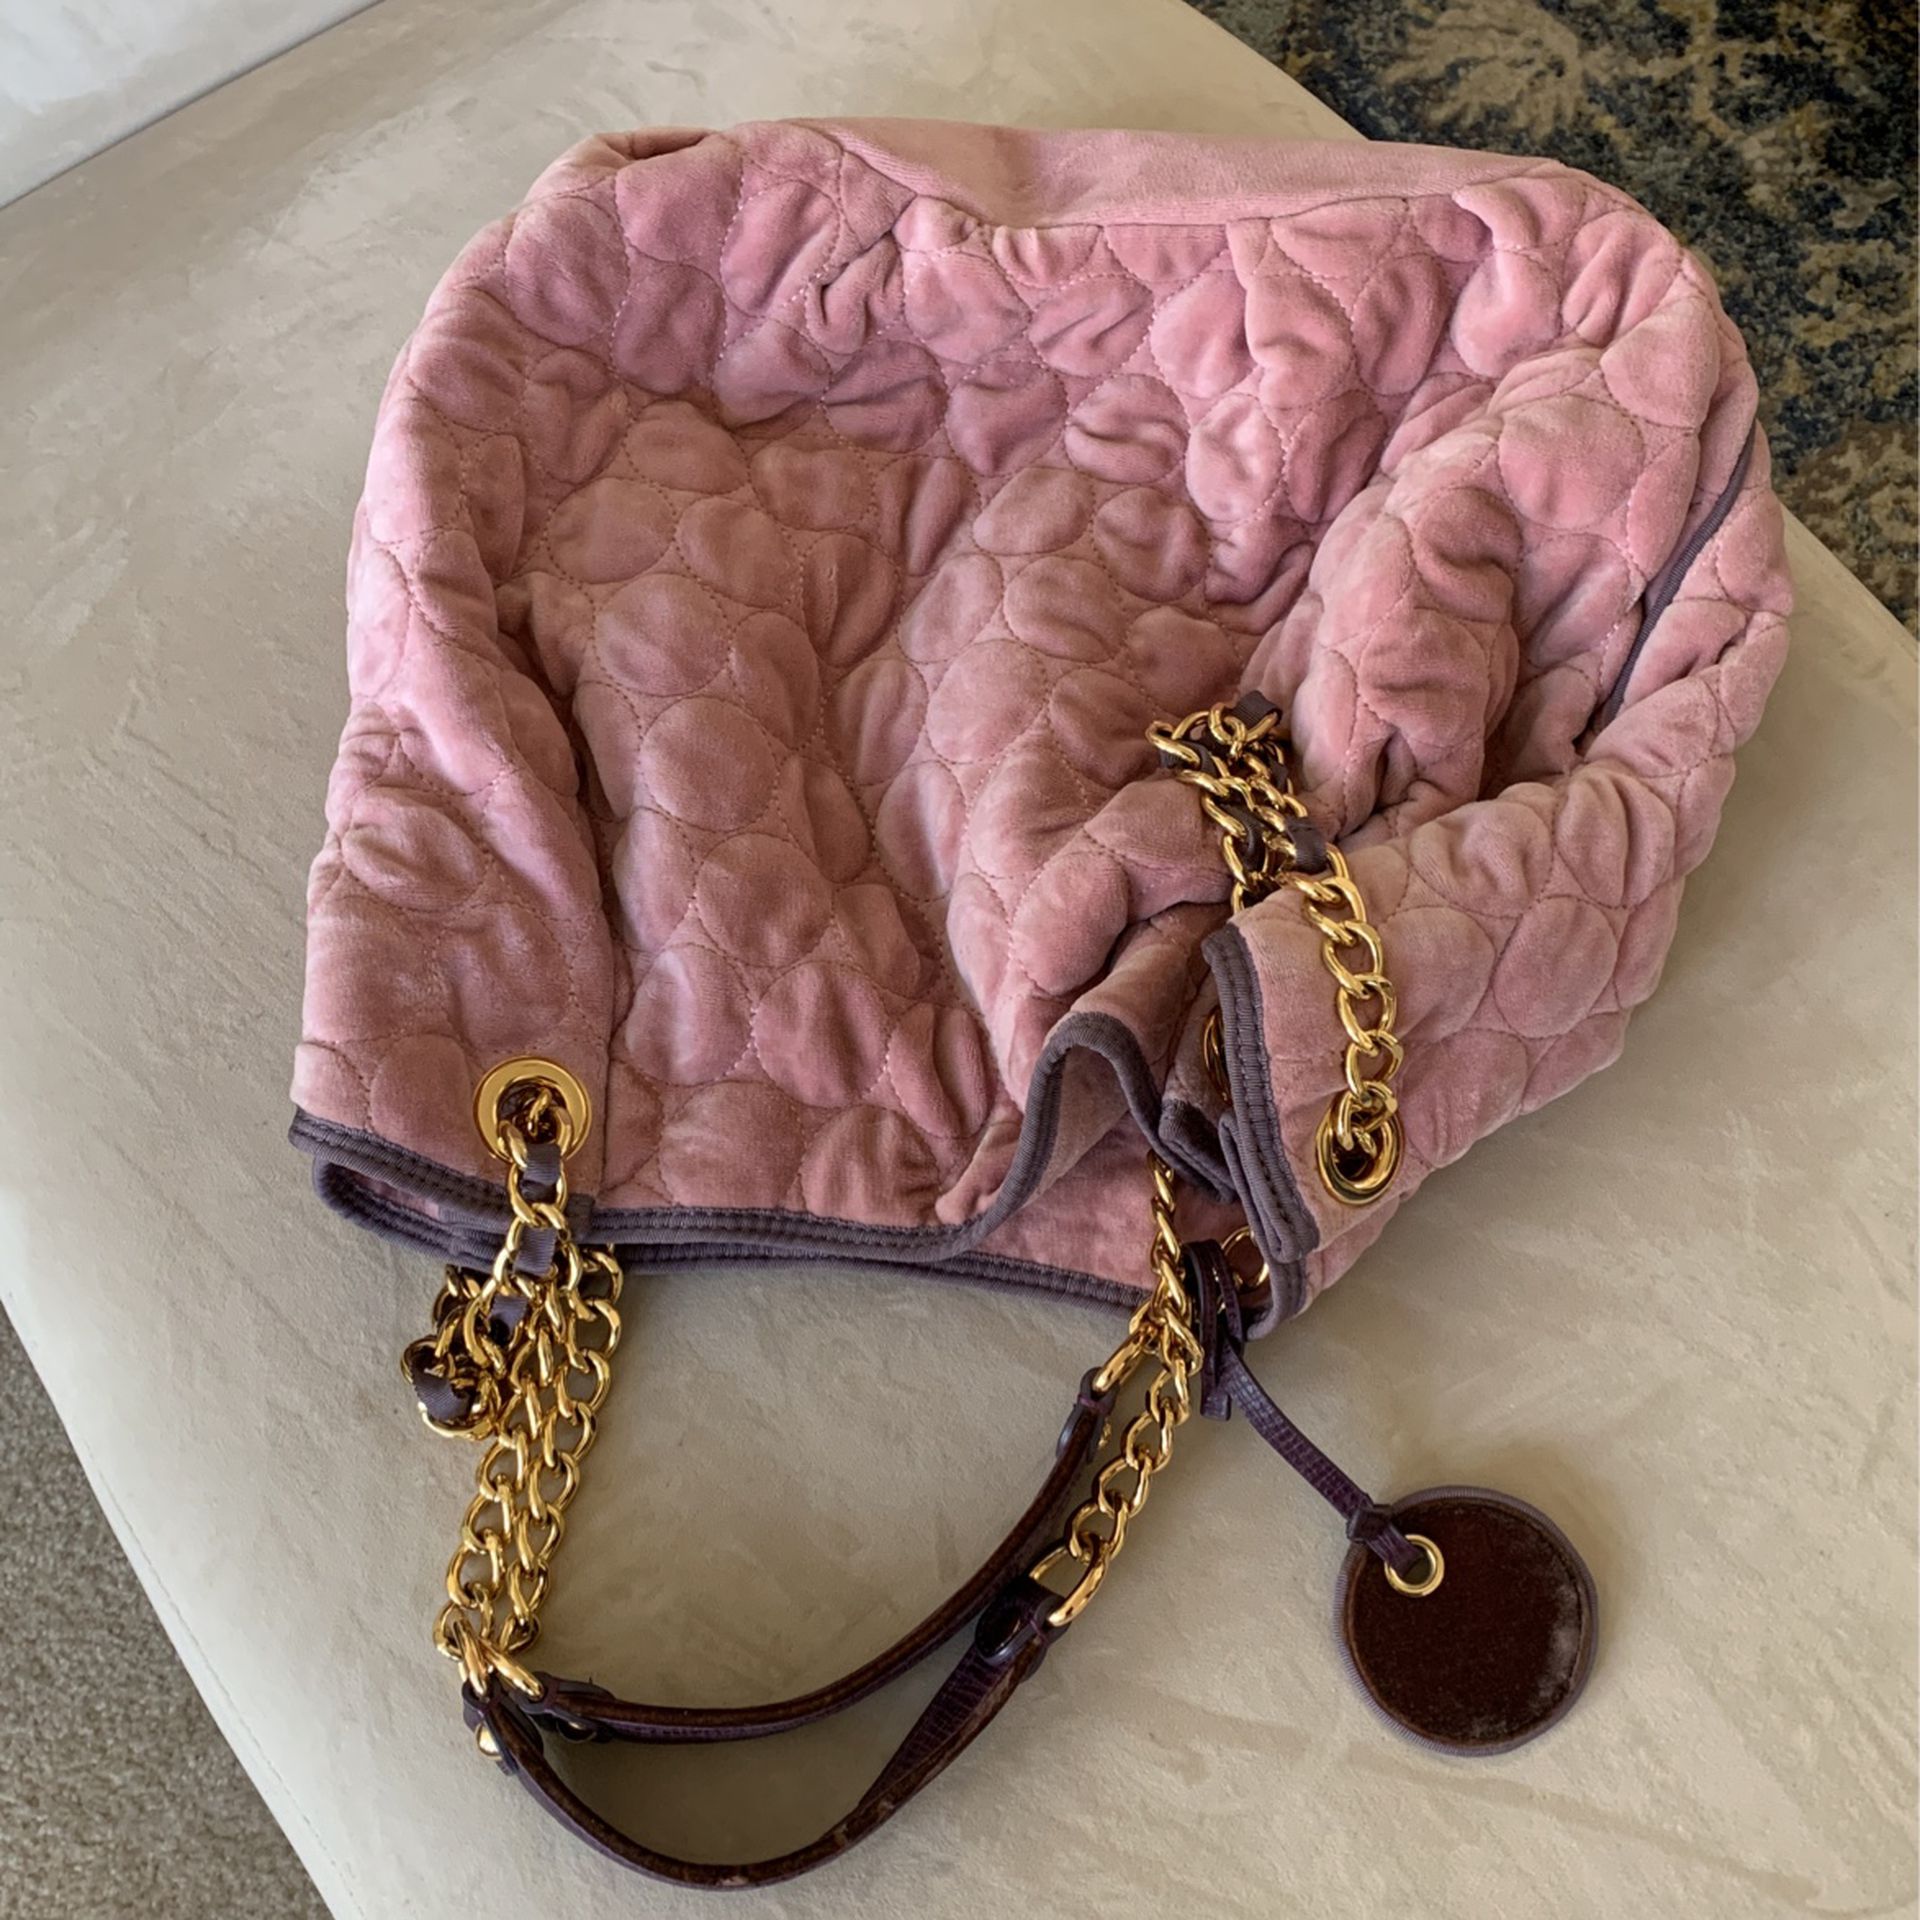 Juicy Couture bag